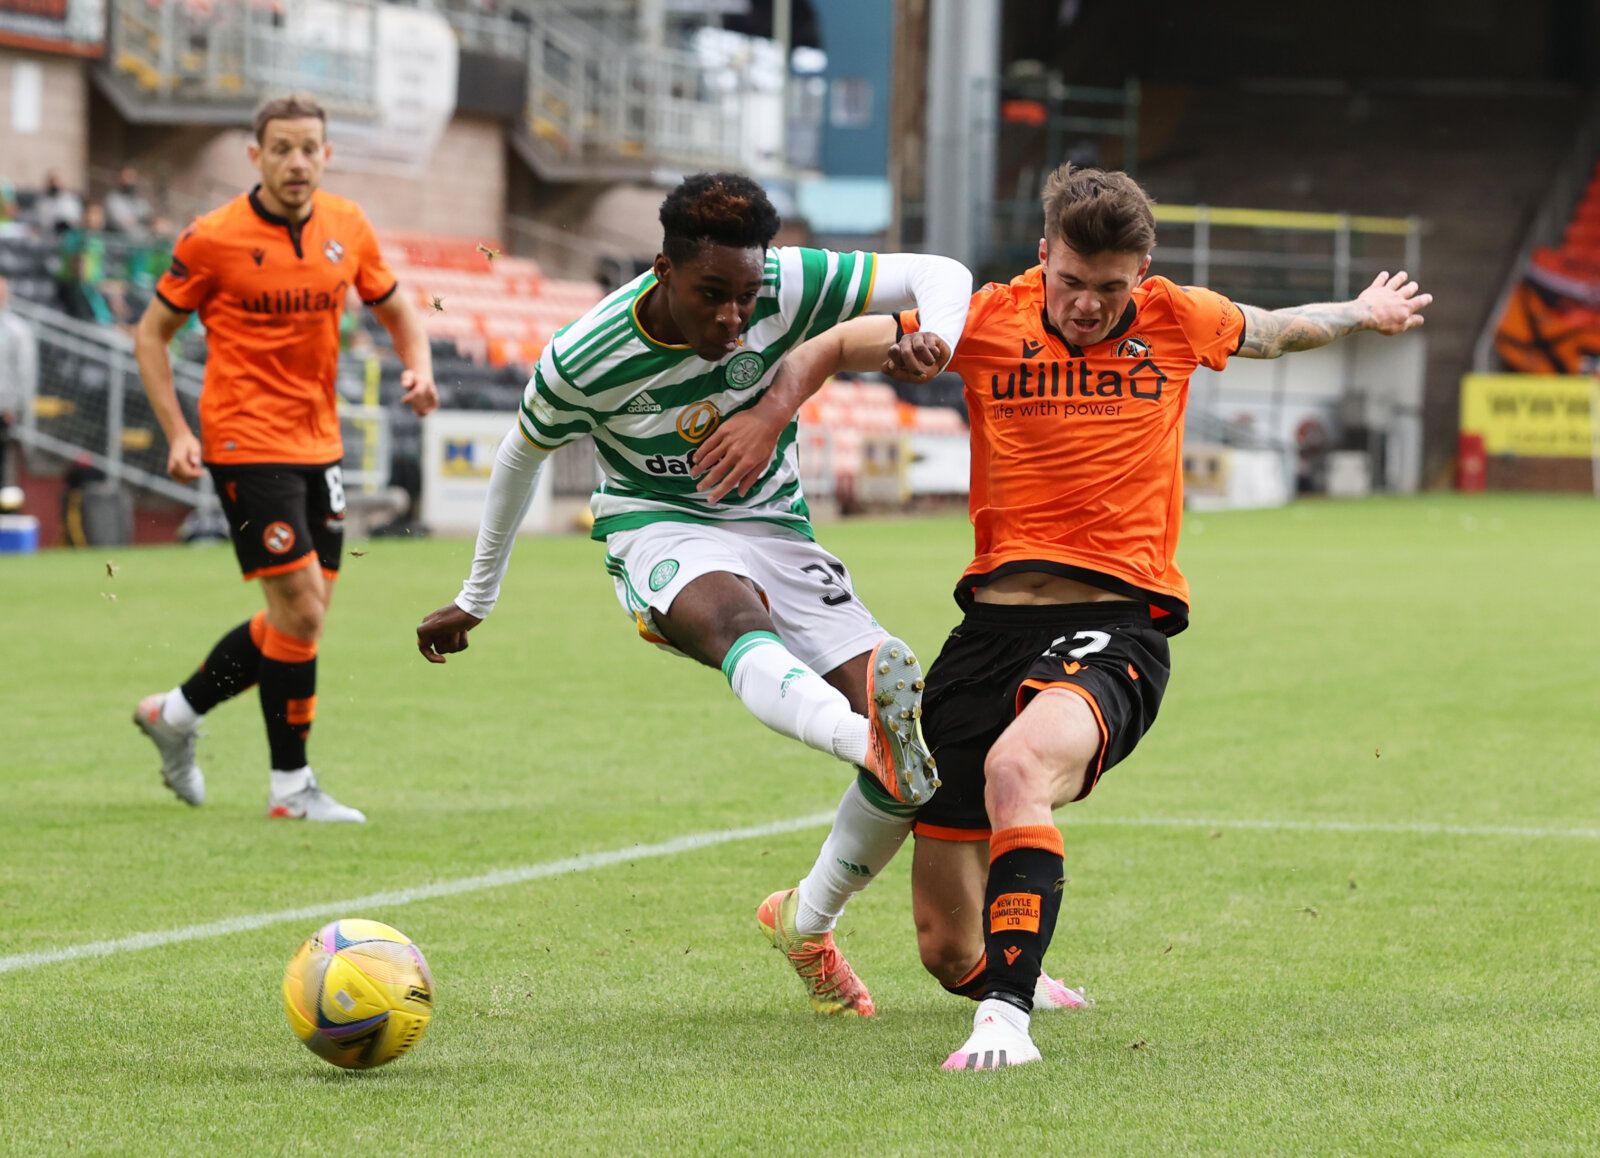 Soccer Football - Scottish Premiership - Dundee United v Celtic - Tannadice Park, Dundee, Scotland, Britain - August 22, 2020 Celtic's Jeremie Frimpong in action with Dundee United's Jamie Robson, as play resumes behind closed doors following the outbreak of the coronavirus disease (COVID-19) Pool via REUTERS/Steve Welsh